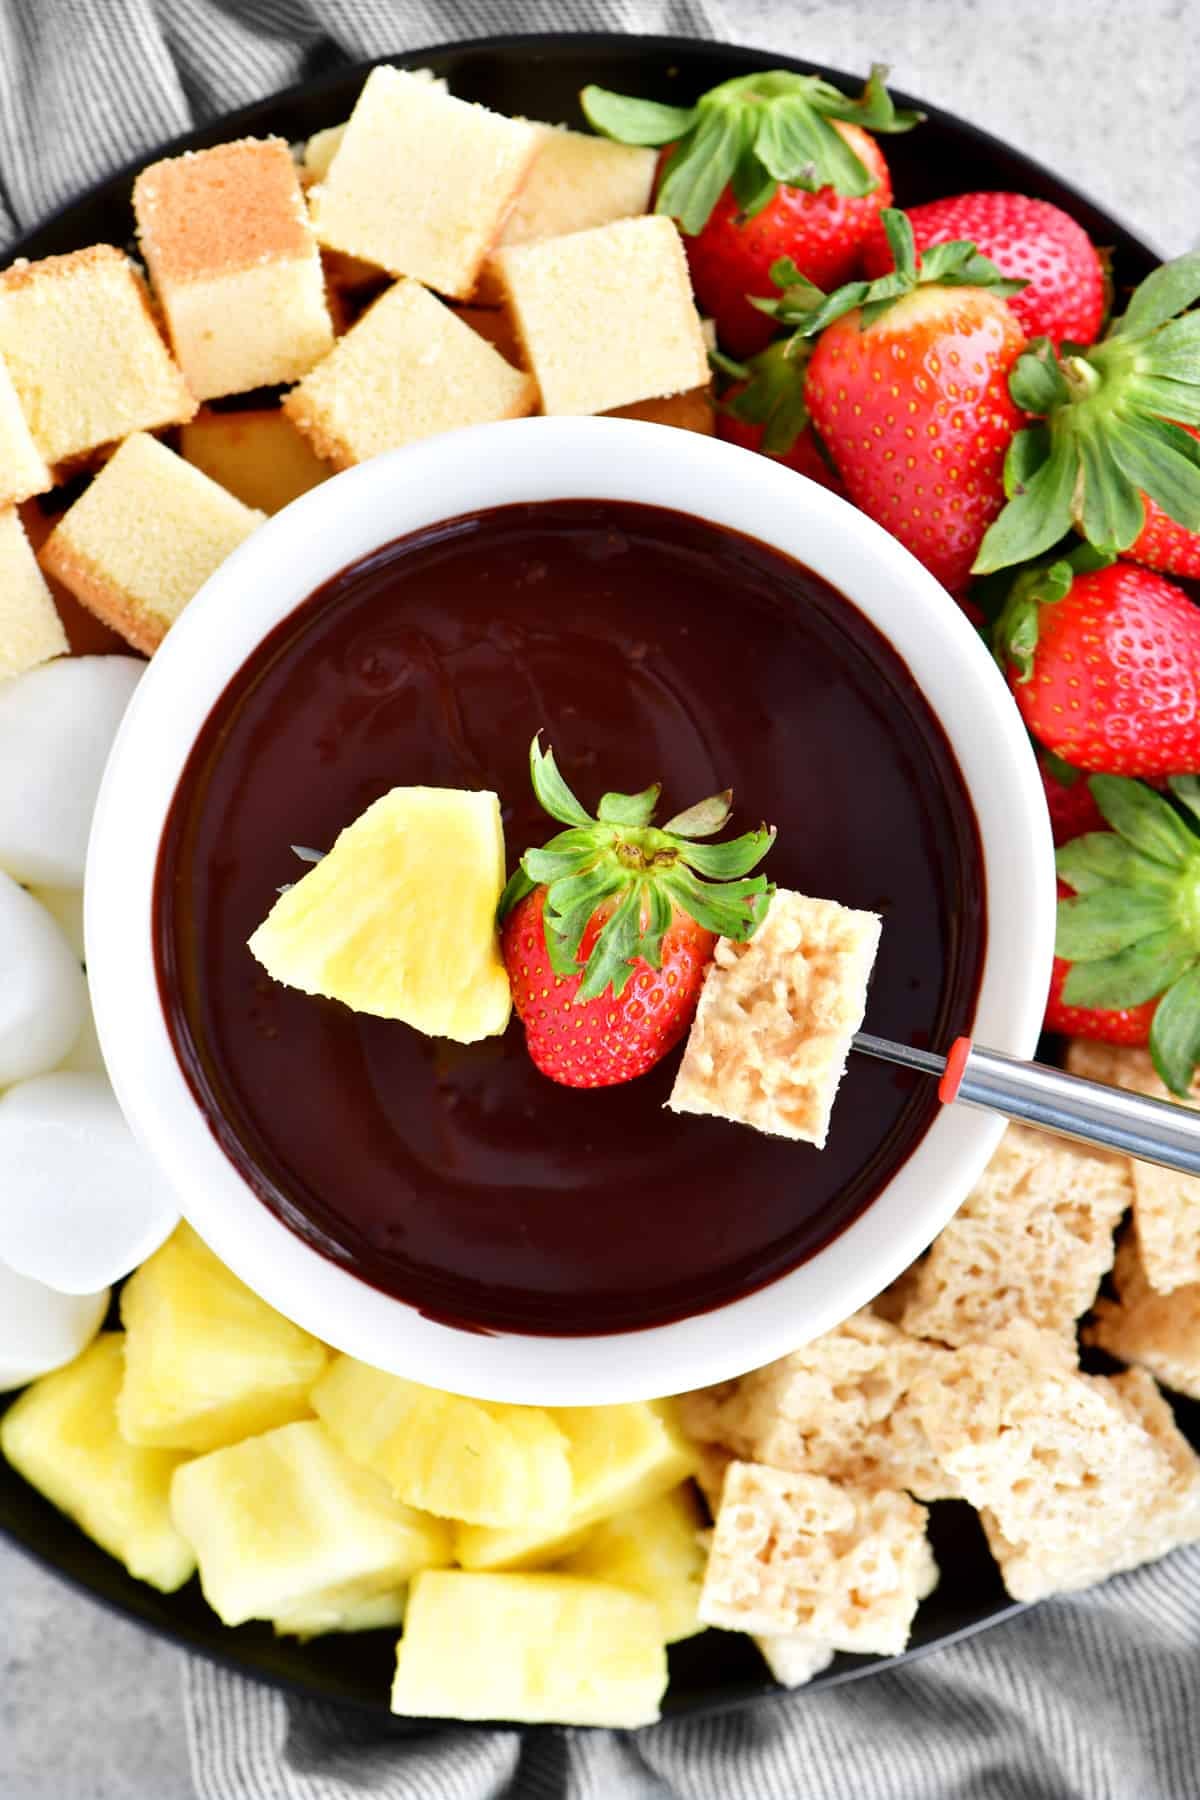 Easy Chocolate Fondue Recipe (Only 5 ingredients!) - Olivia's Cuisine